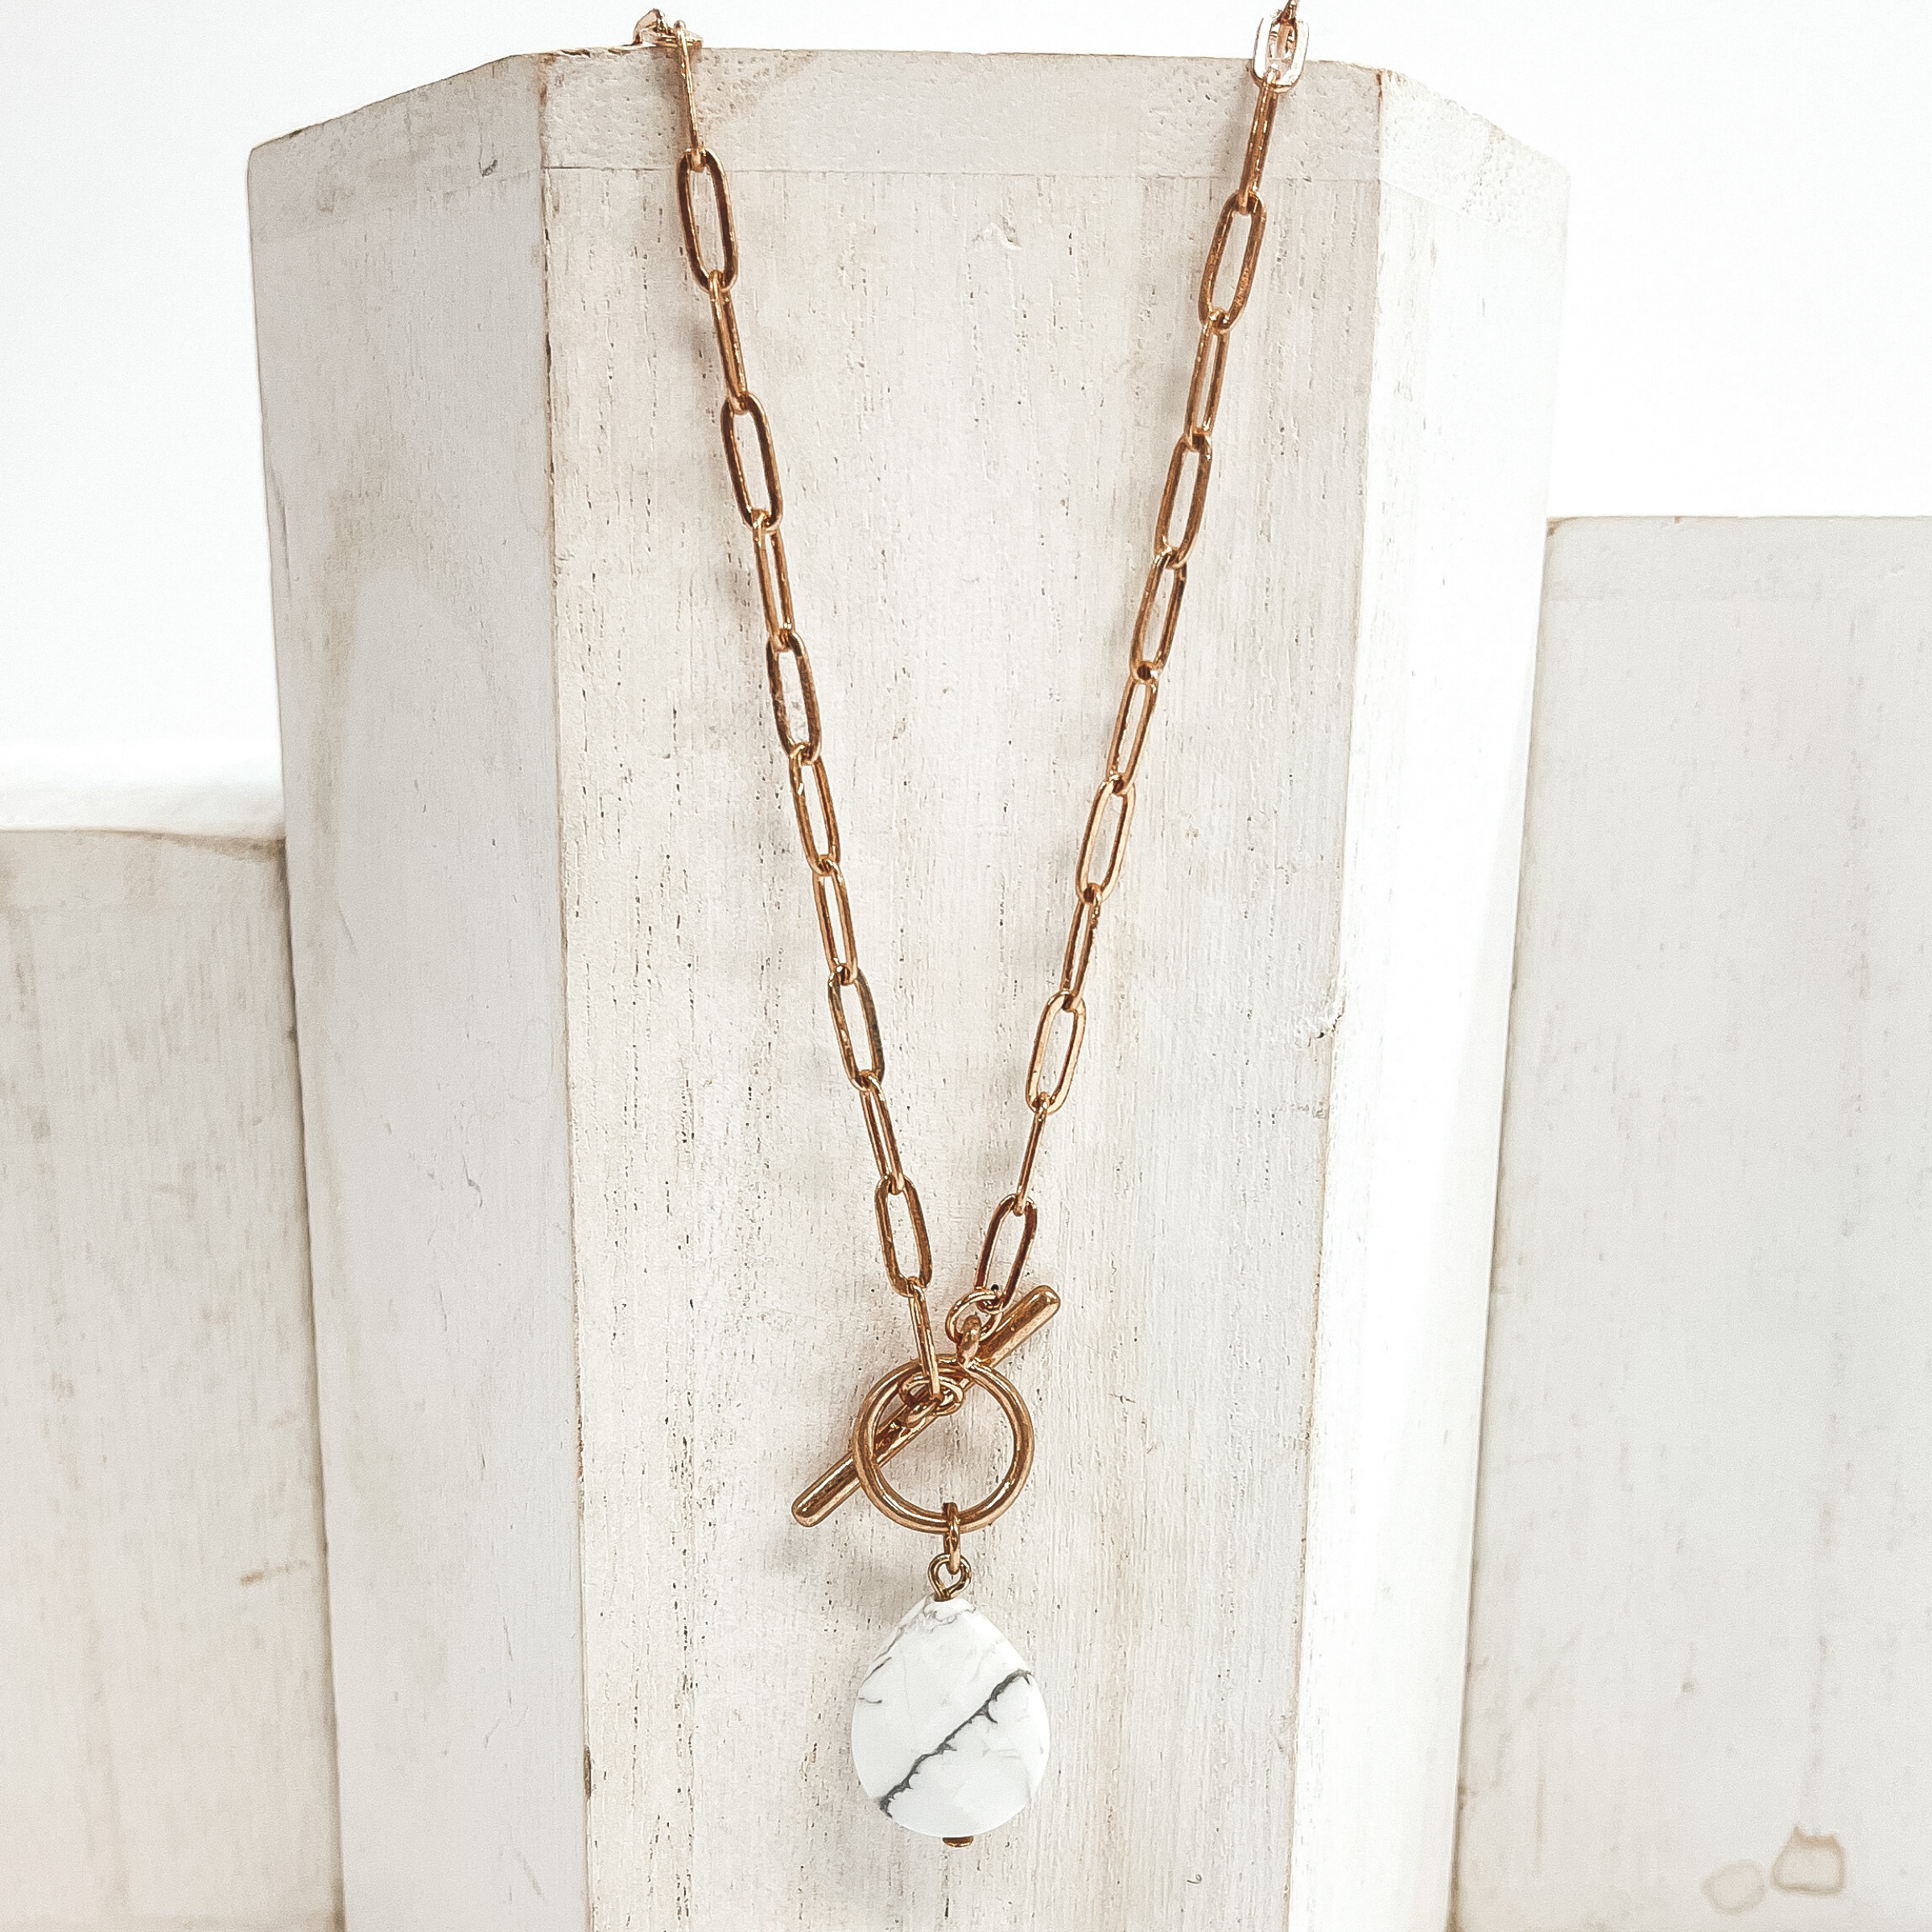 Gold paperclip chain necklace with toggle clasp and  natural stone teardrop pendant in white.  Taken on  a white block and white background.